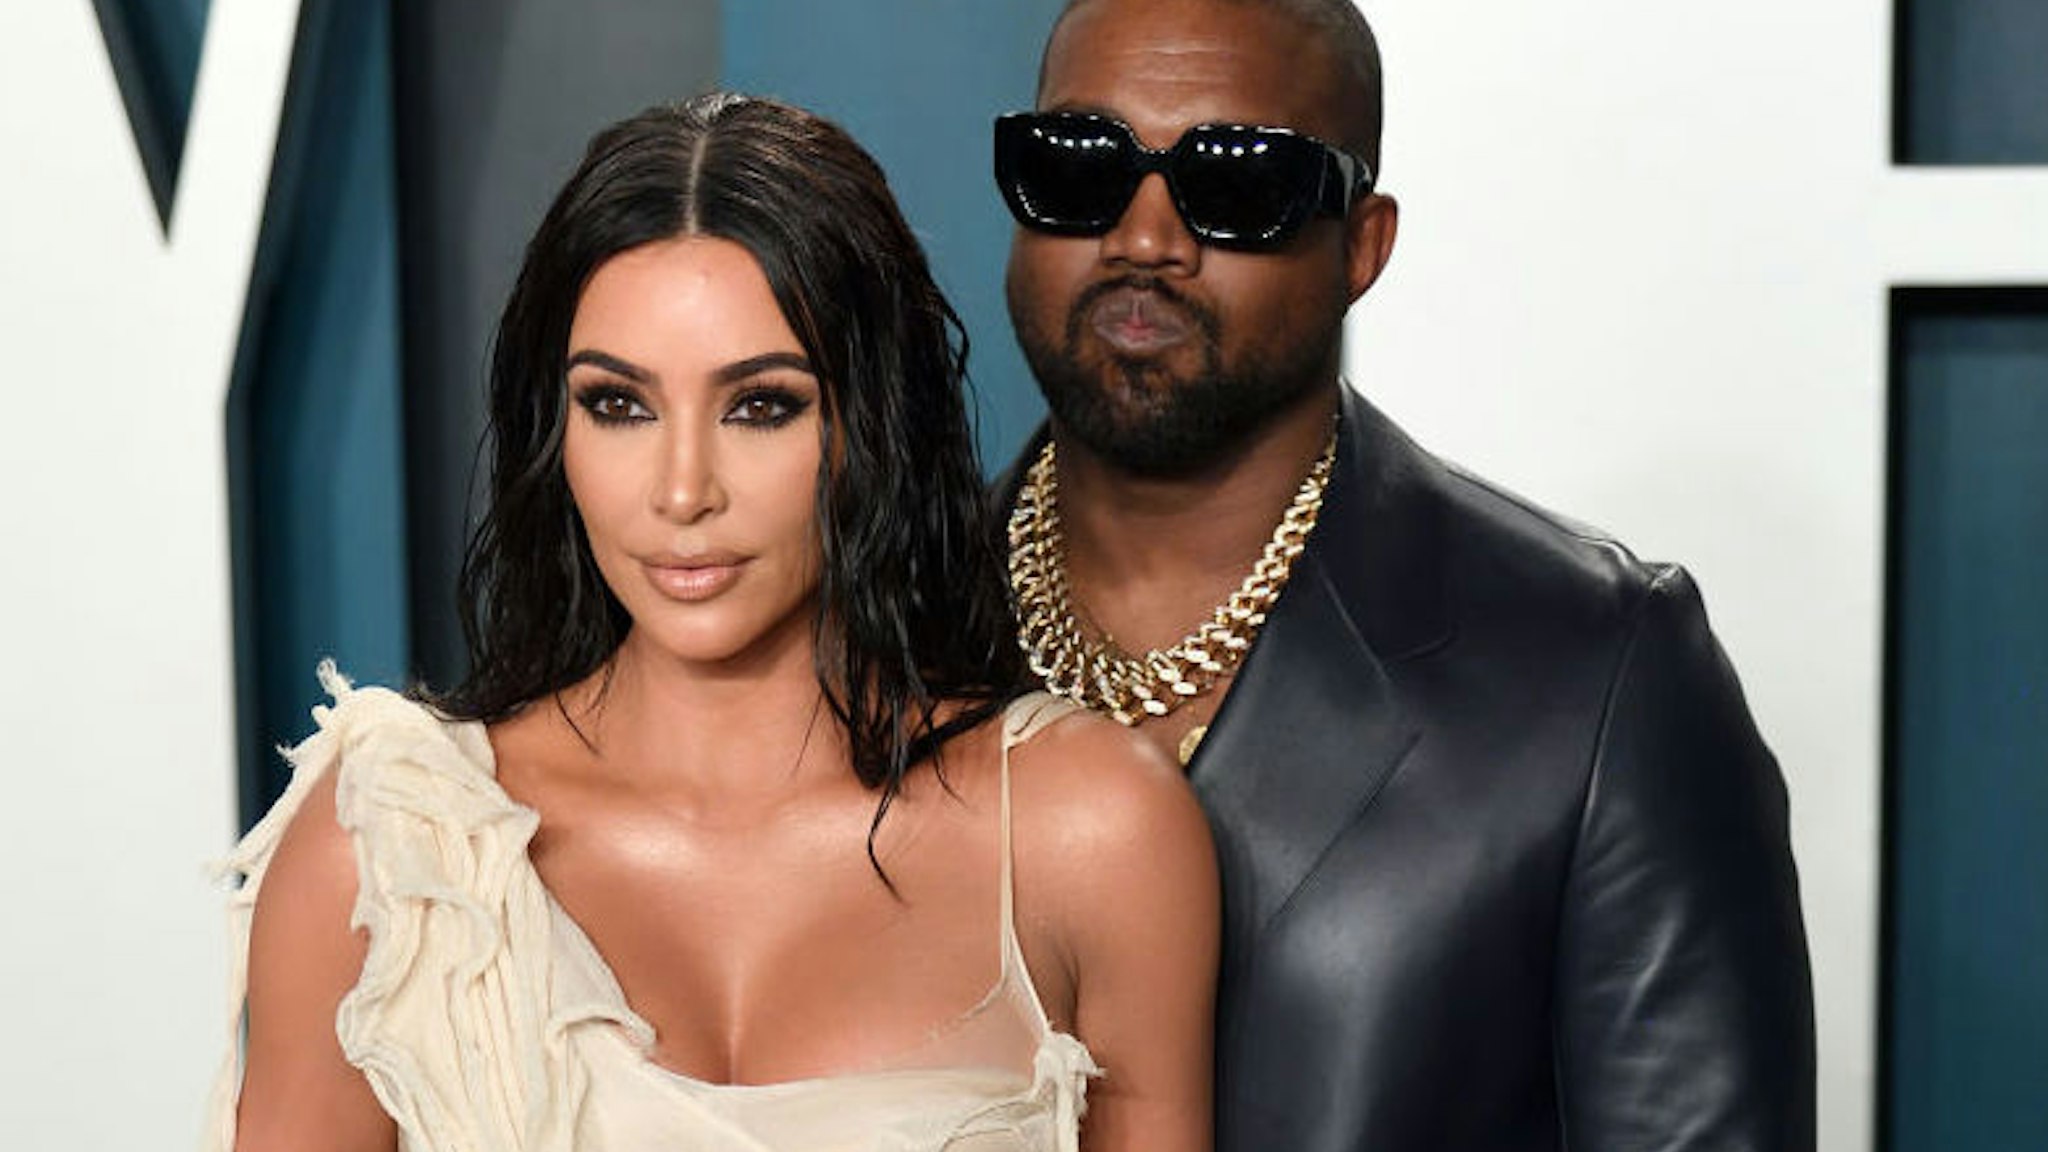 Kim Kardashian and Kanye West attend the 2020 Vanity Fair Oscar Party hosted by Radhika Jones at Wallis Annenberg Center for the Performing Arts on February 09, 2020 in Beverly Hills, California.